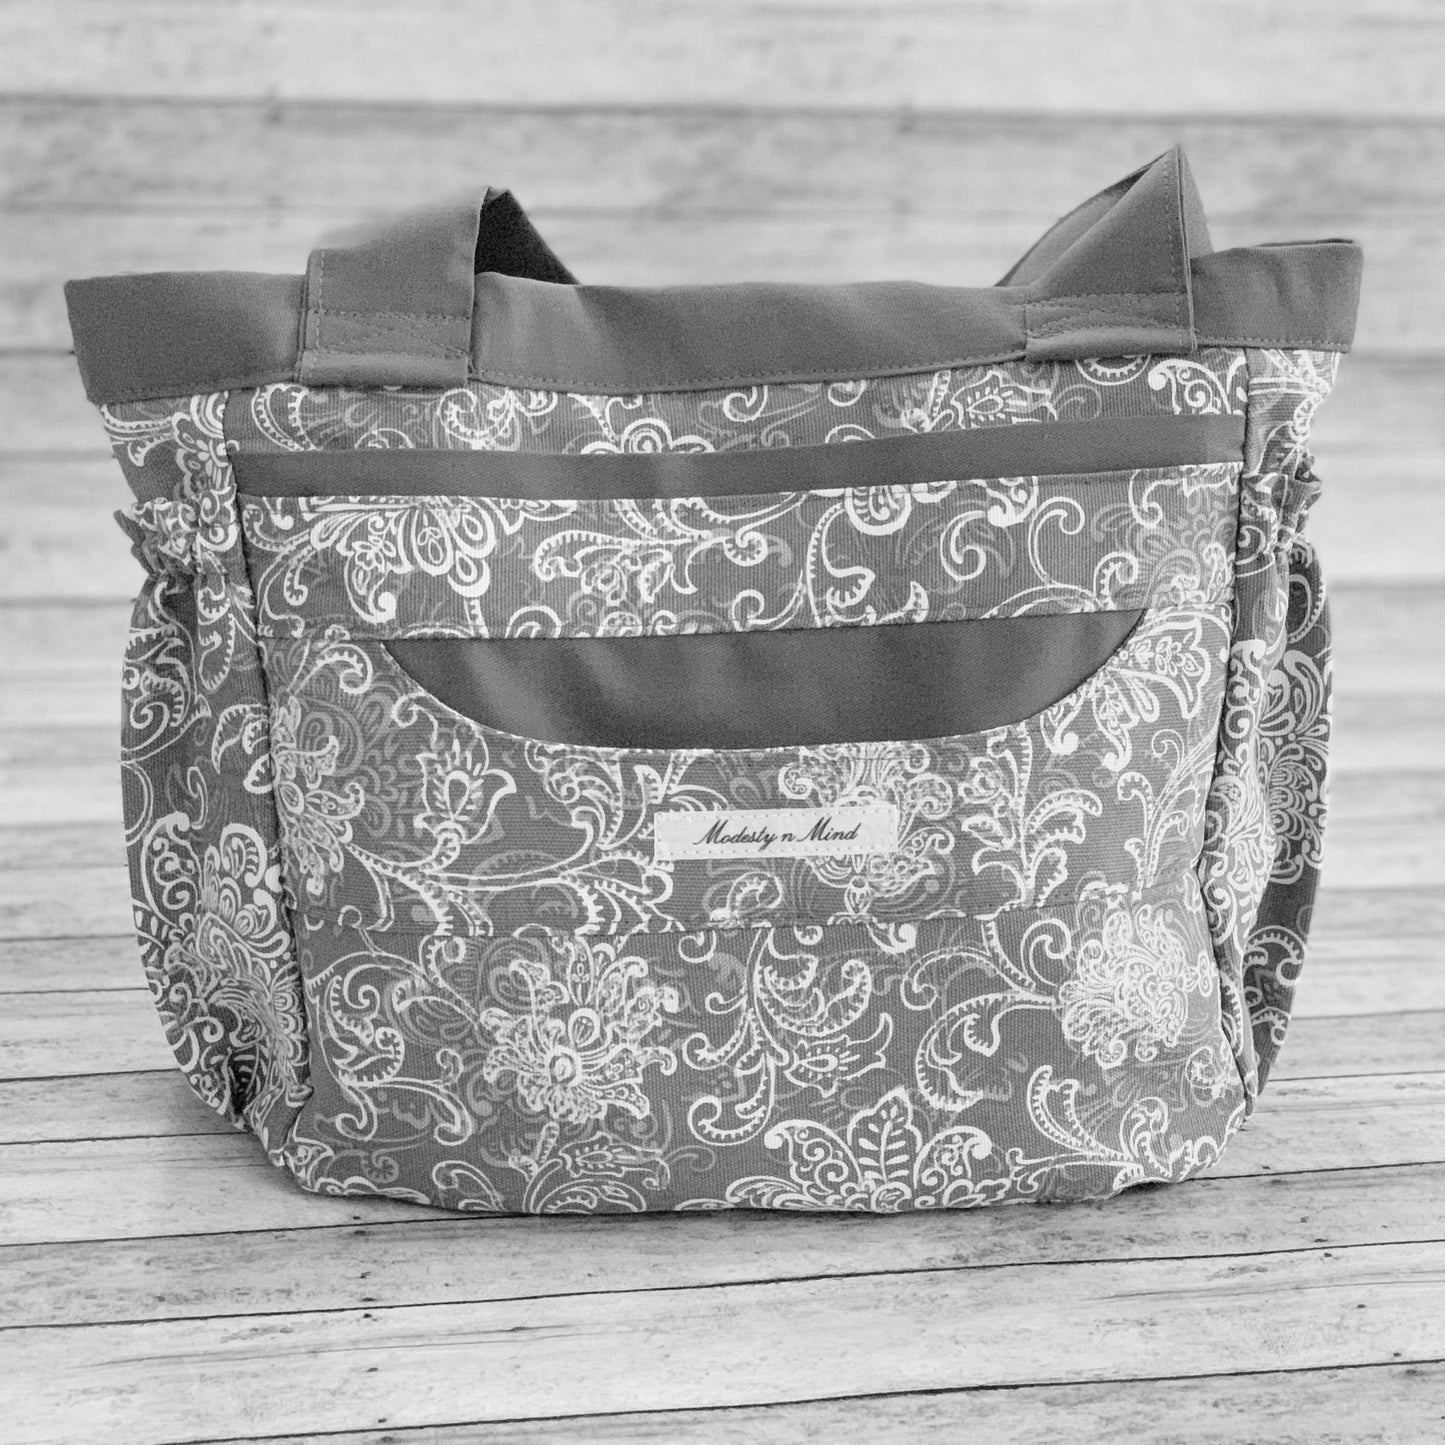 Black Floral Mini Everything Tote